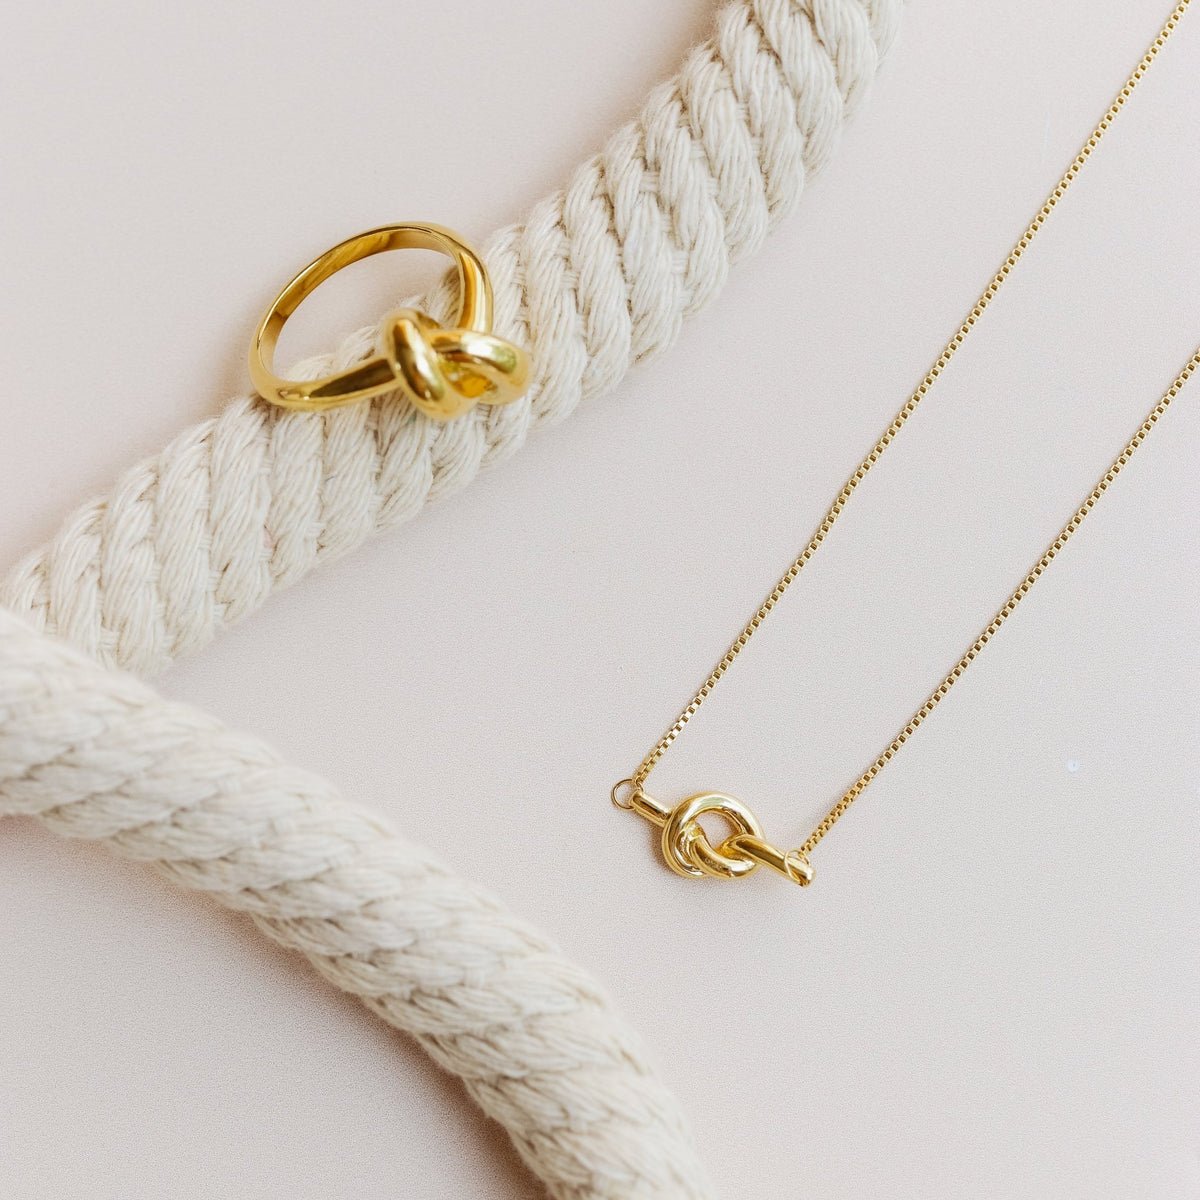 POISE OFFSET KNOT NECKLACE - GOLD - SO PRETTY CARA COTTER